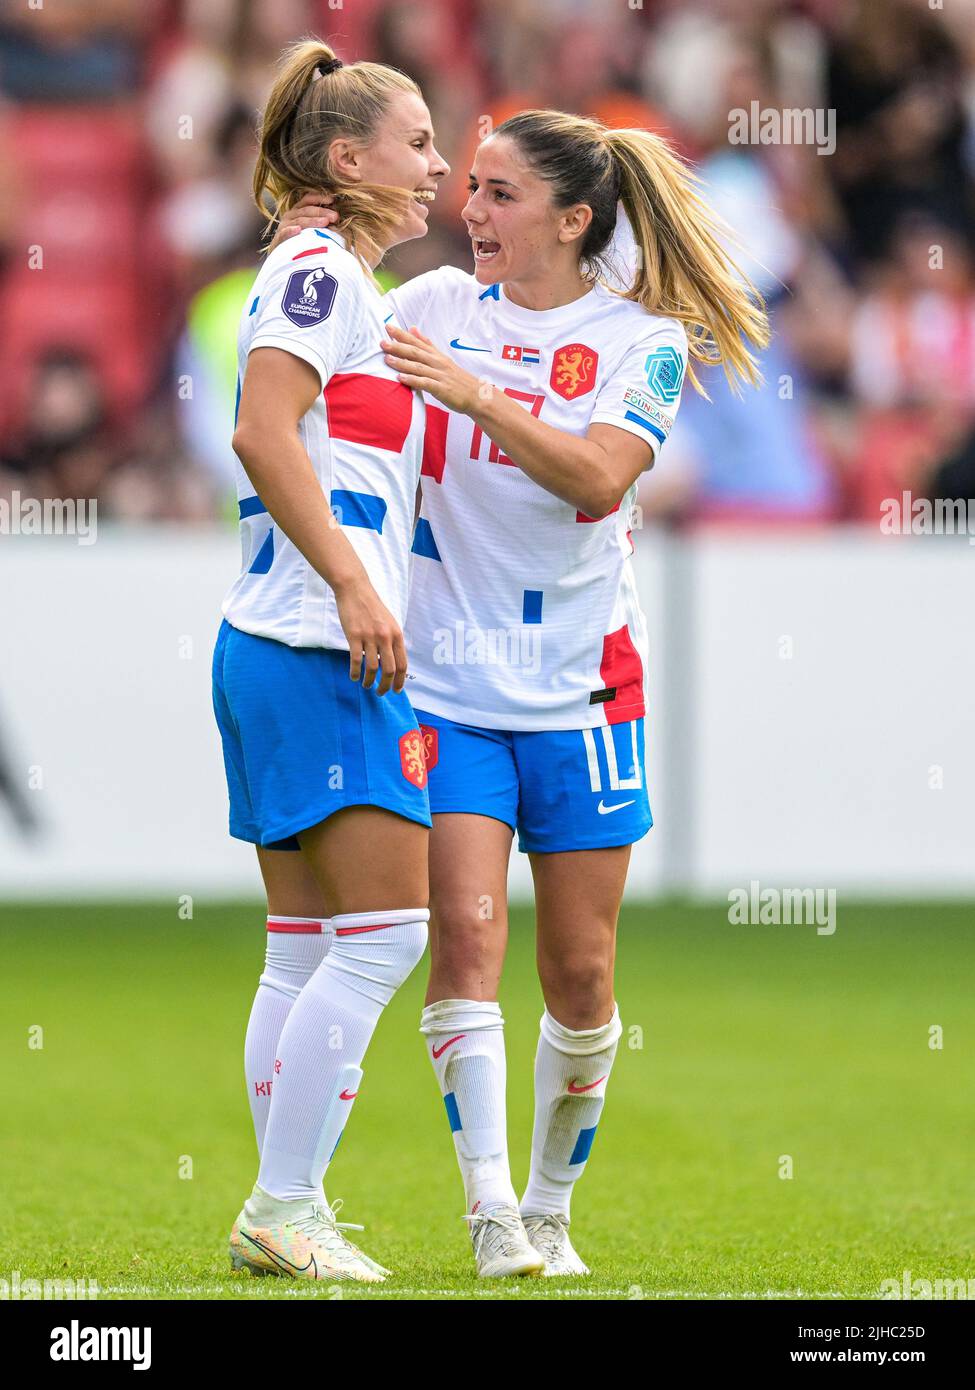 SHEFFIELD - (lr) Victoria Pelova of Holland women and Danielle van de Donk of Holland women celebrate the 1-3 during the UEFA Women's EURO England 2022 match between Switzerland and the Netherlands at Bramall Lane stadium on July 17, 2022 in Sheffield, United Kingdom. ANP GERRIT VAN COLOGNE Stock Photo